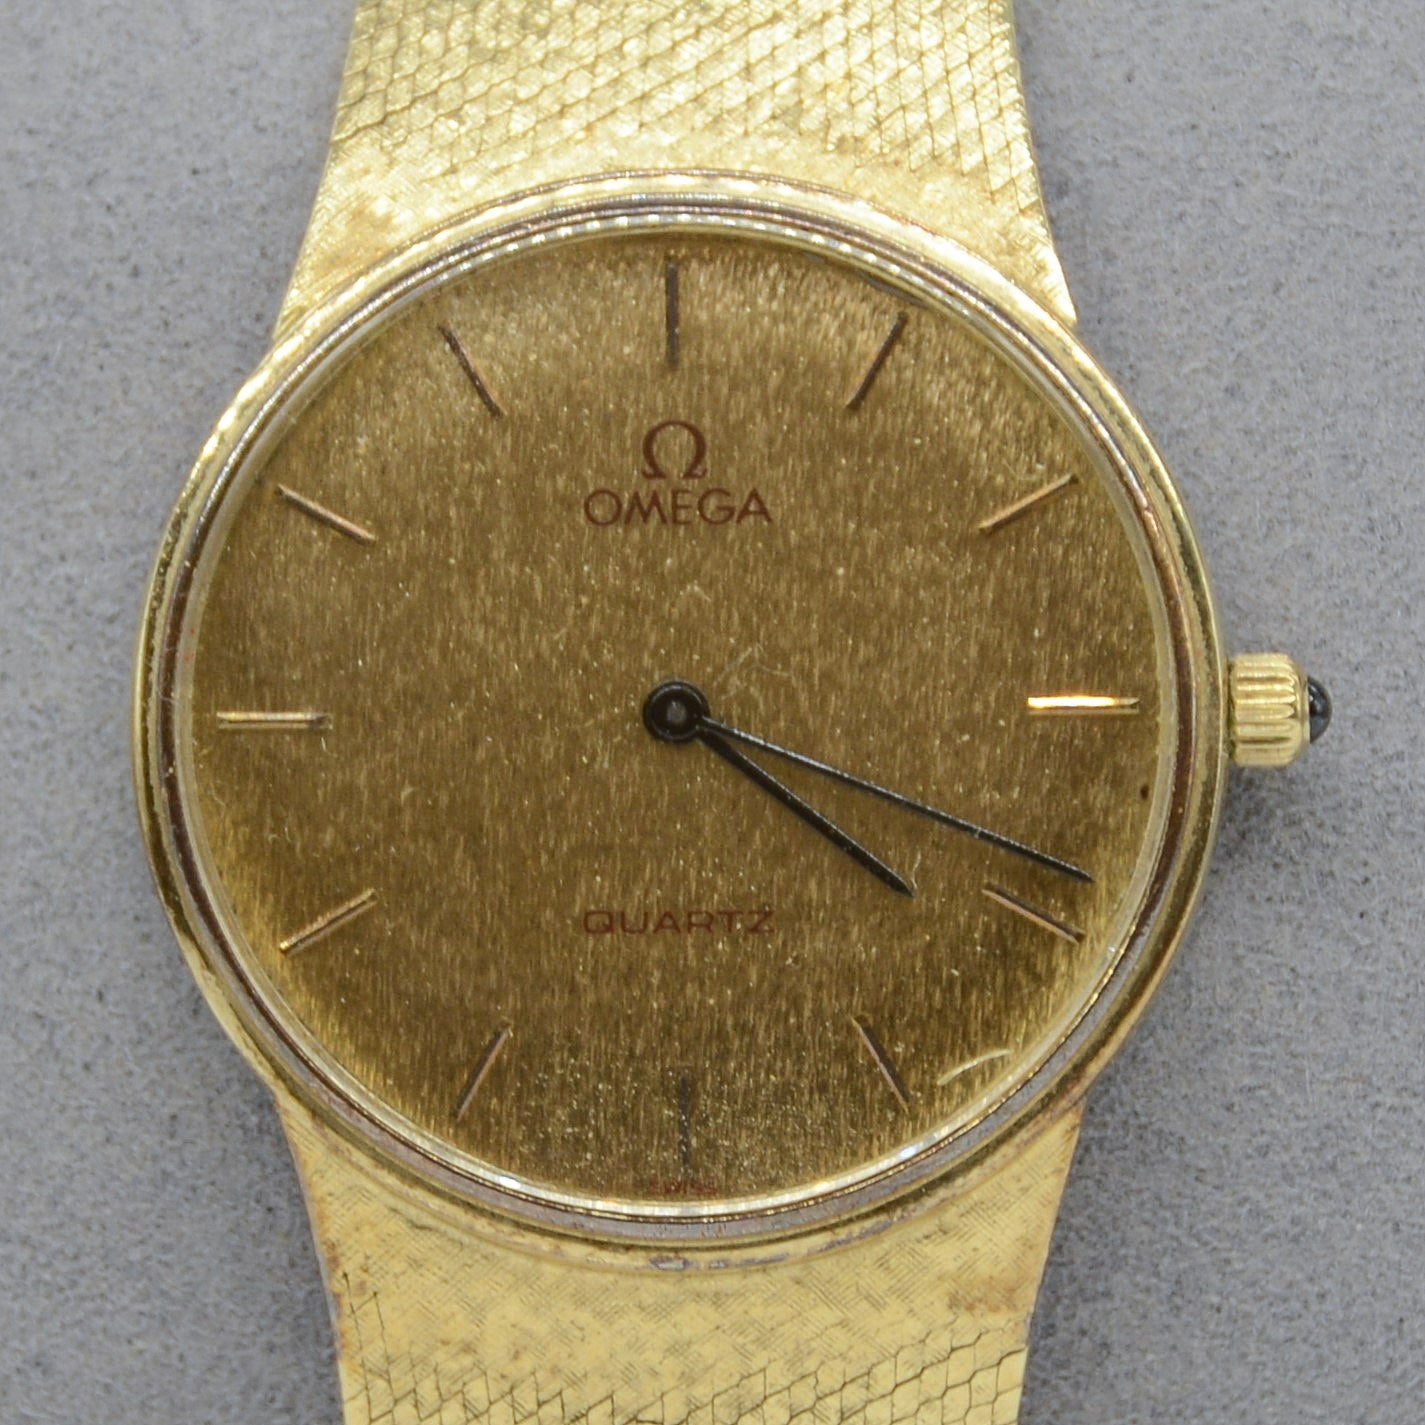 'Omega' Solid Gold Watch | 7